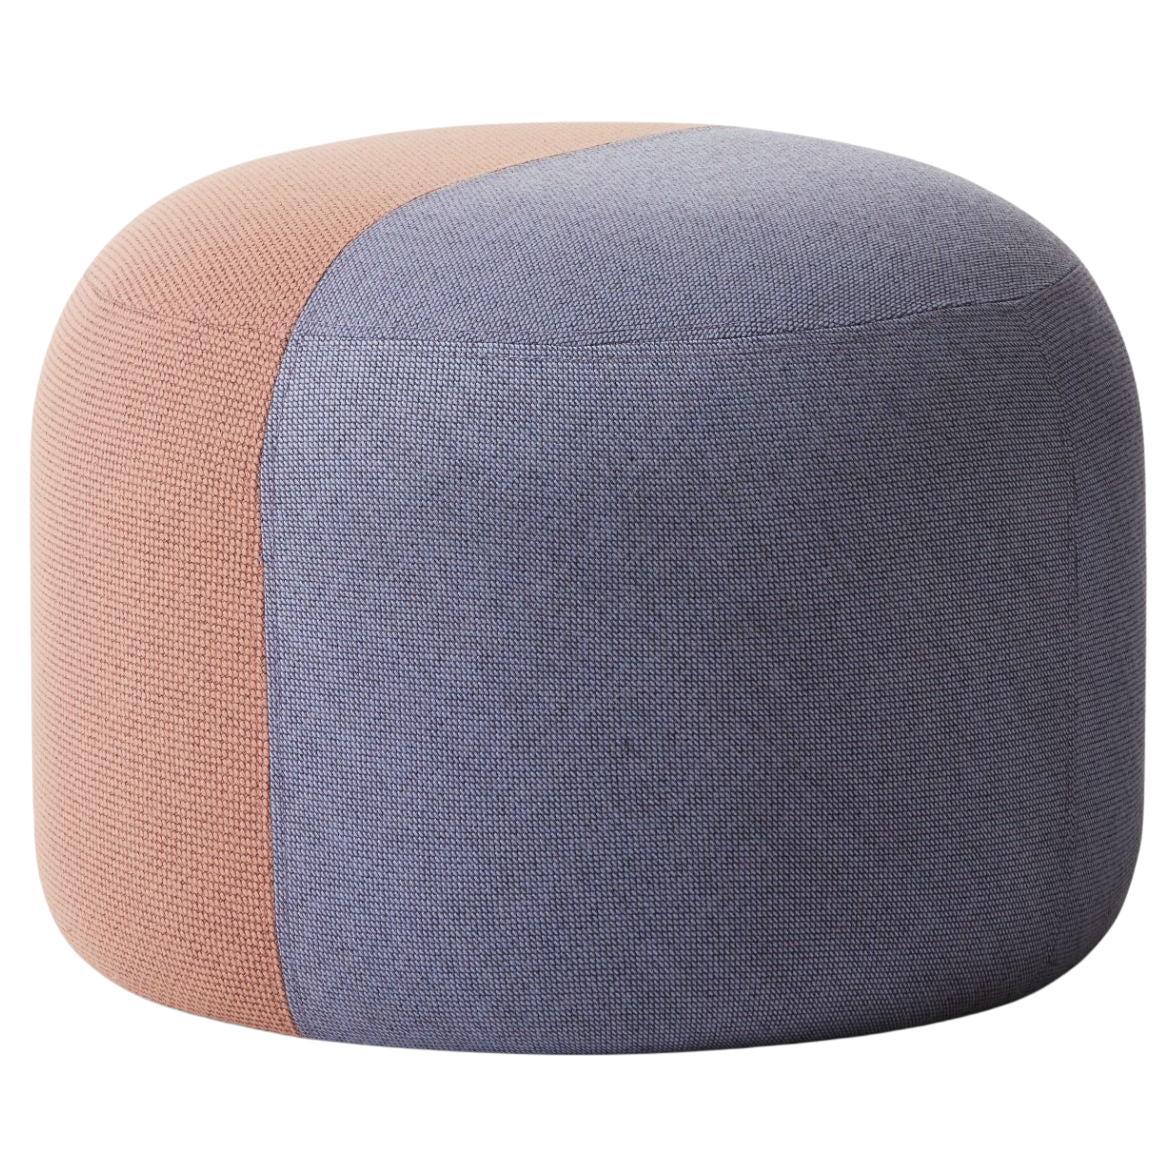 Dainty Pouf Fresh Peach, Soft Violet by Warm Nordic For Sale